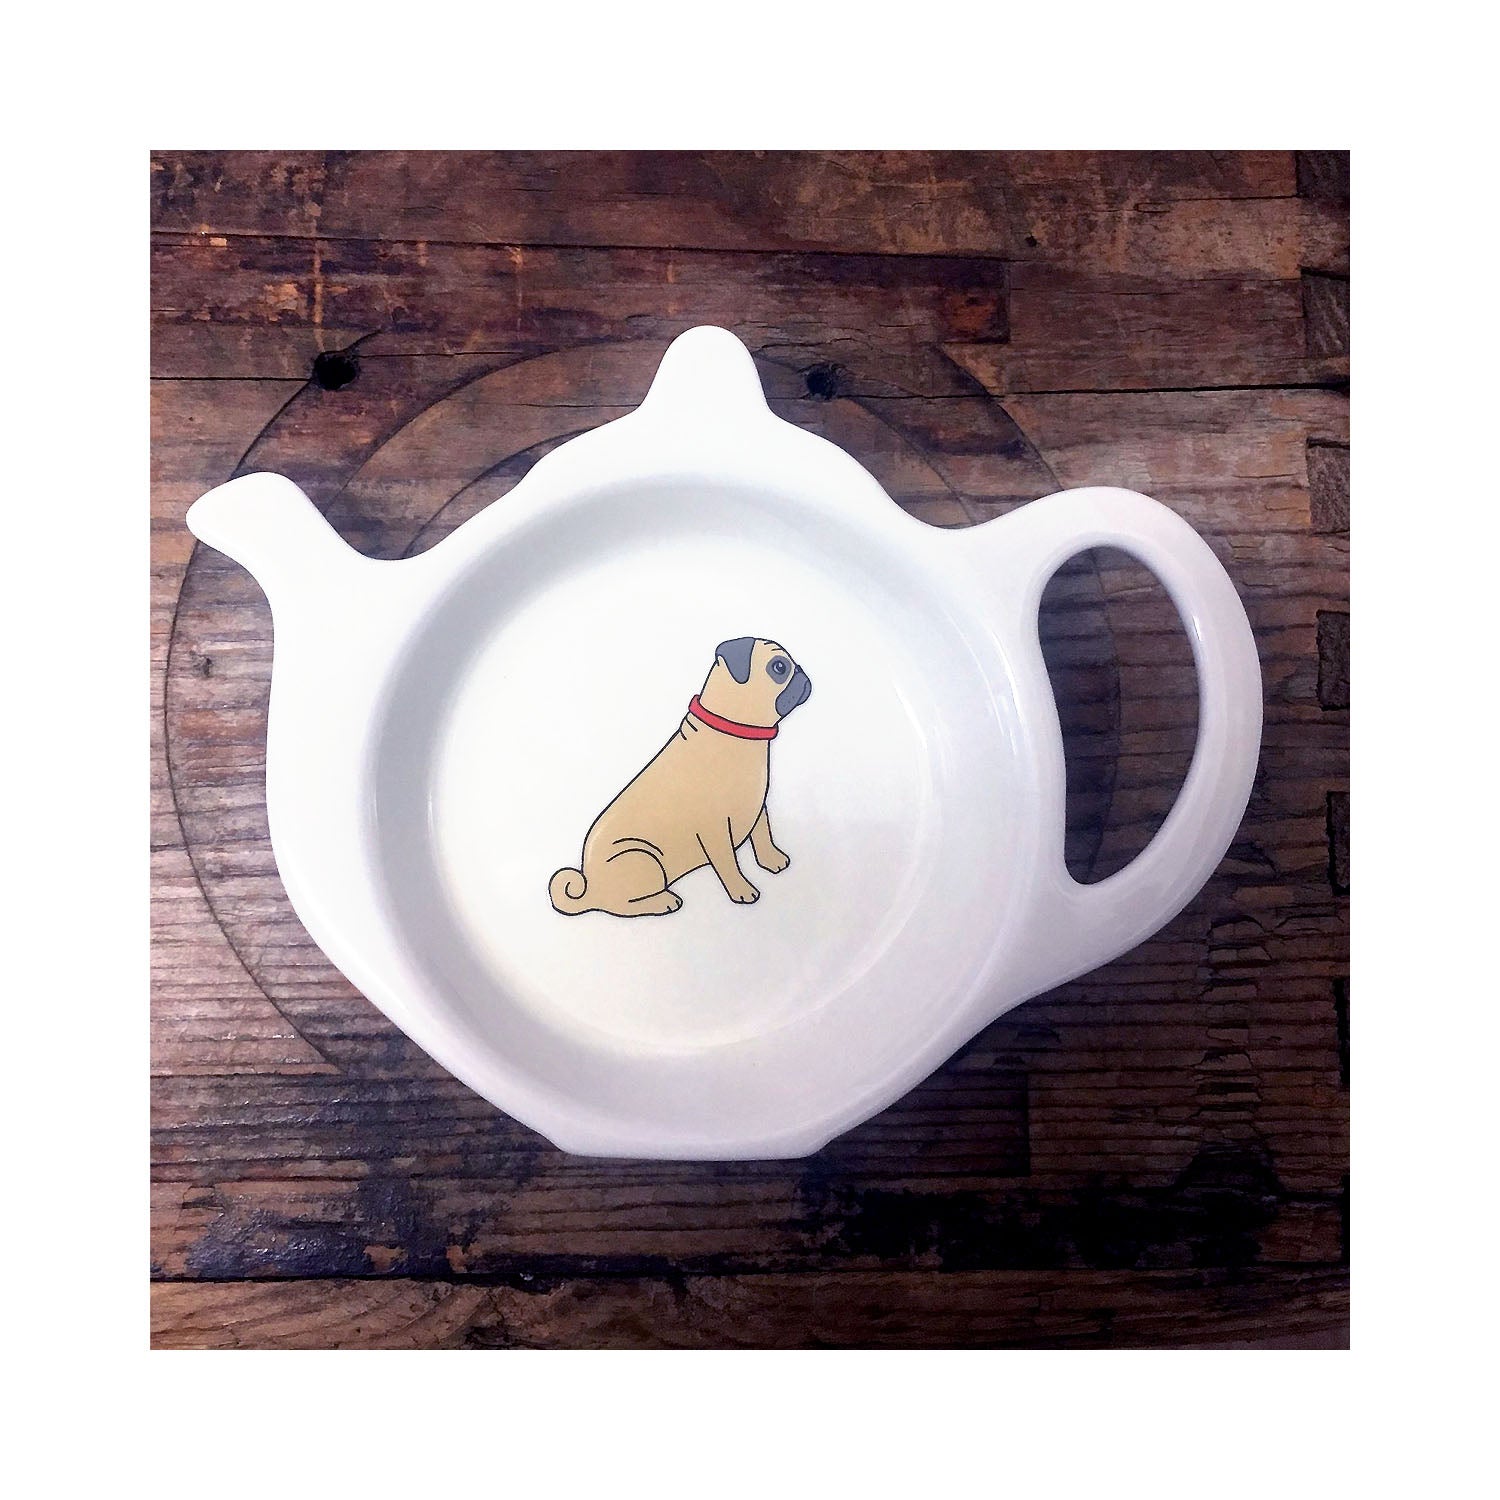 Dog Lover Gifts available at Dog Krazy Gifts - Winston The Pug Teabag Dish - part of the Sweet William range available from Dog Krazy Gifts